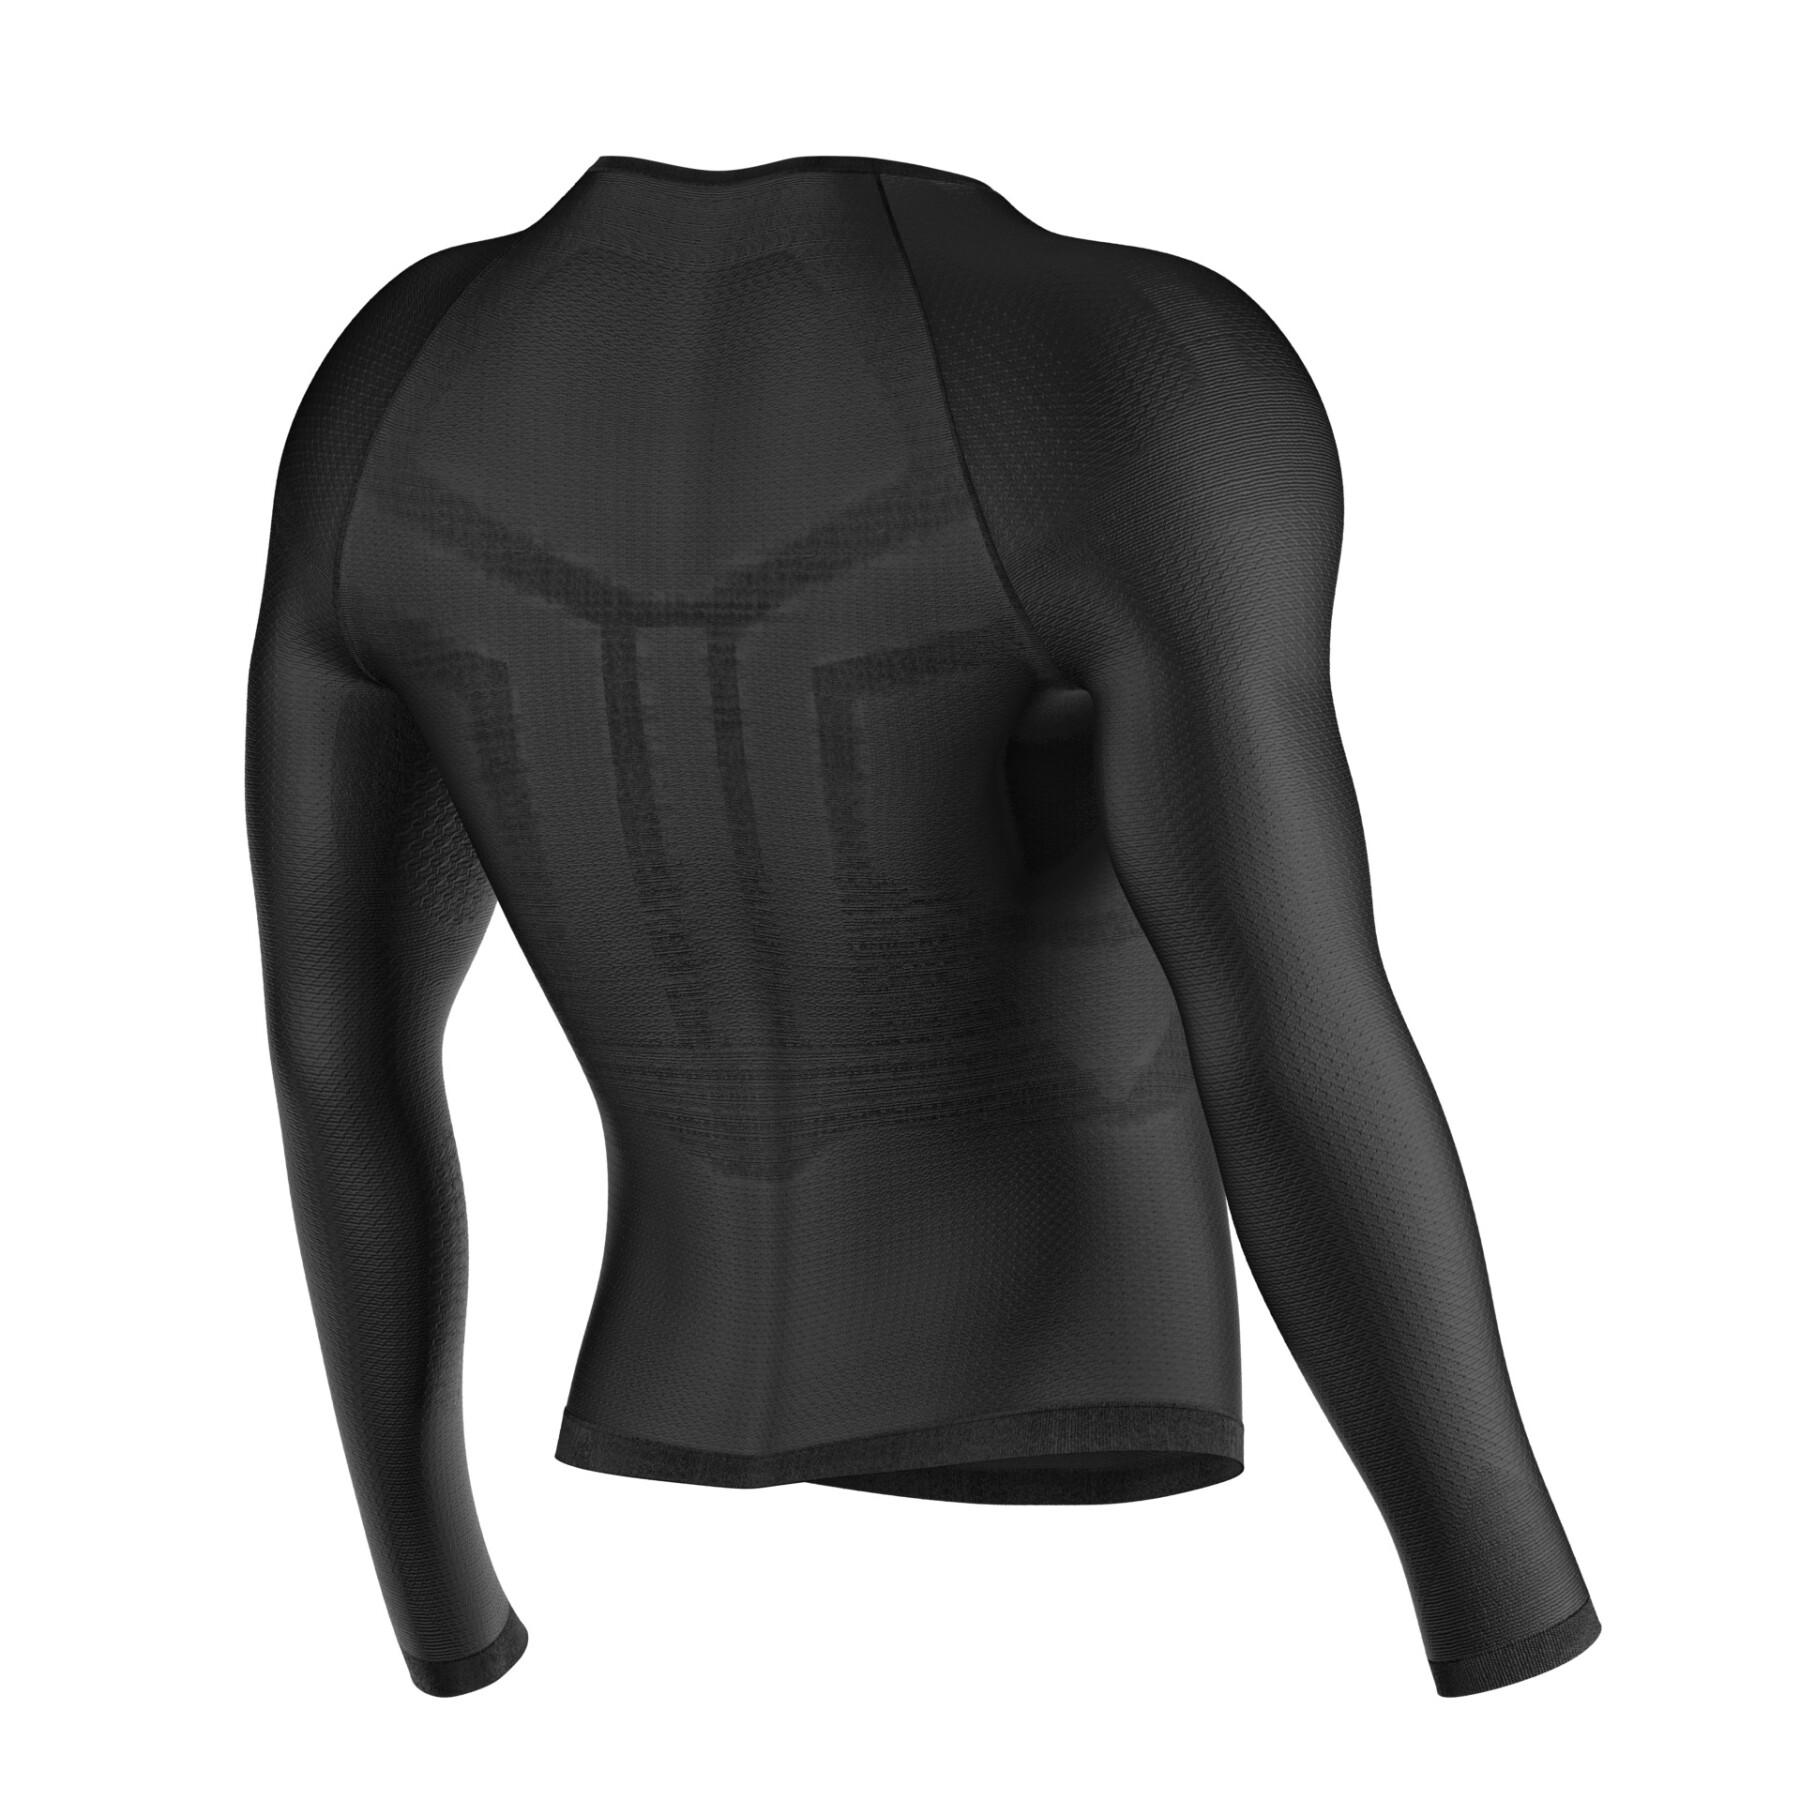 Long sleeve compression jersey Compressport Thermo 3D Ultralight